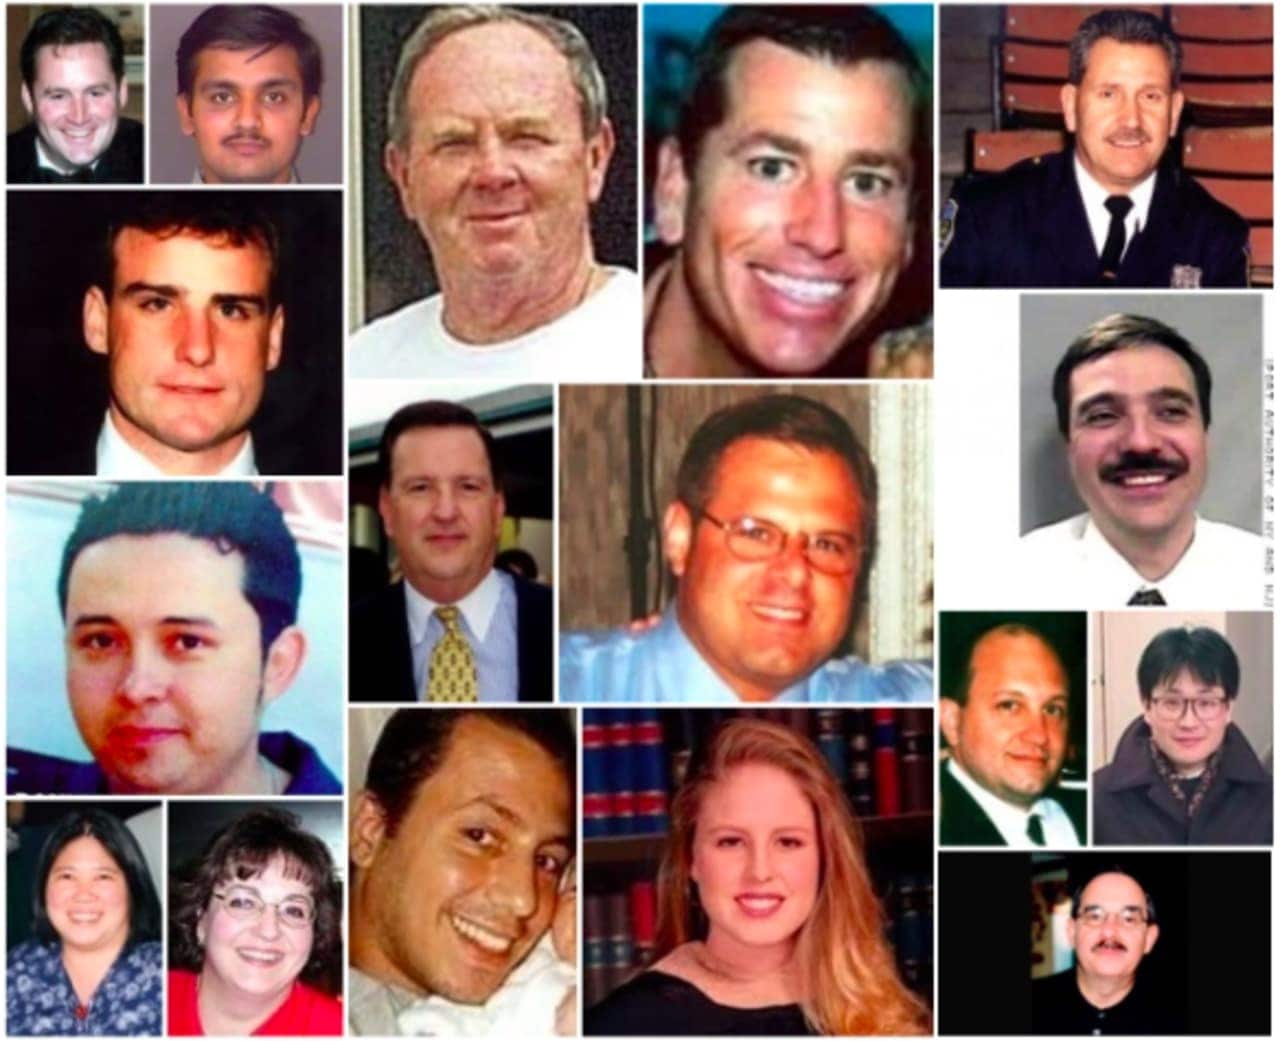 Remembering the Bergen County residents who were killed in the terrorist attacks of 9/11.